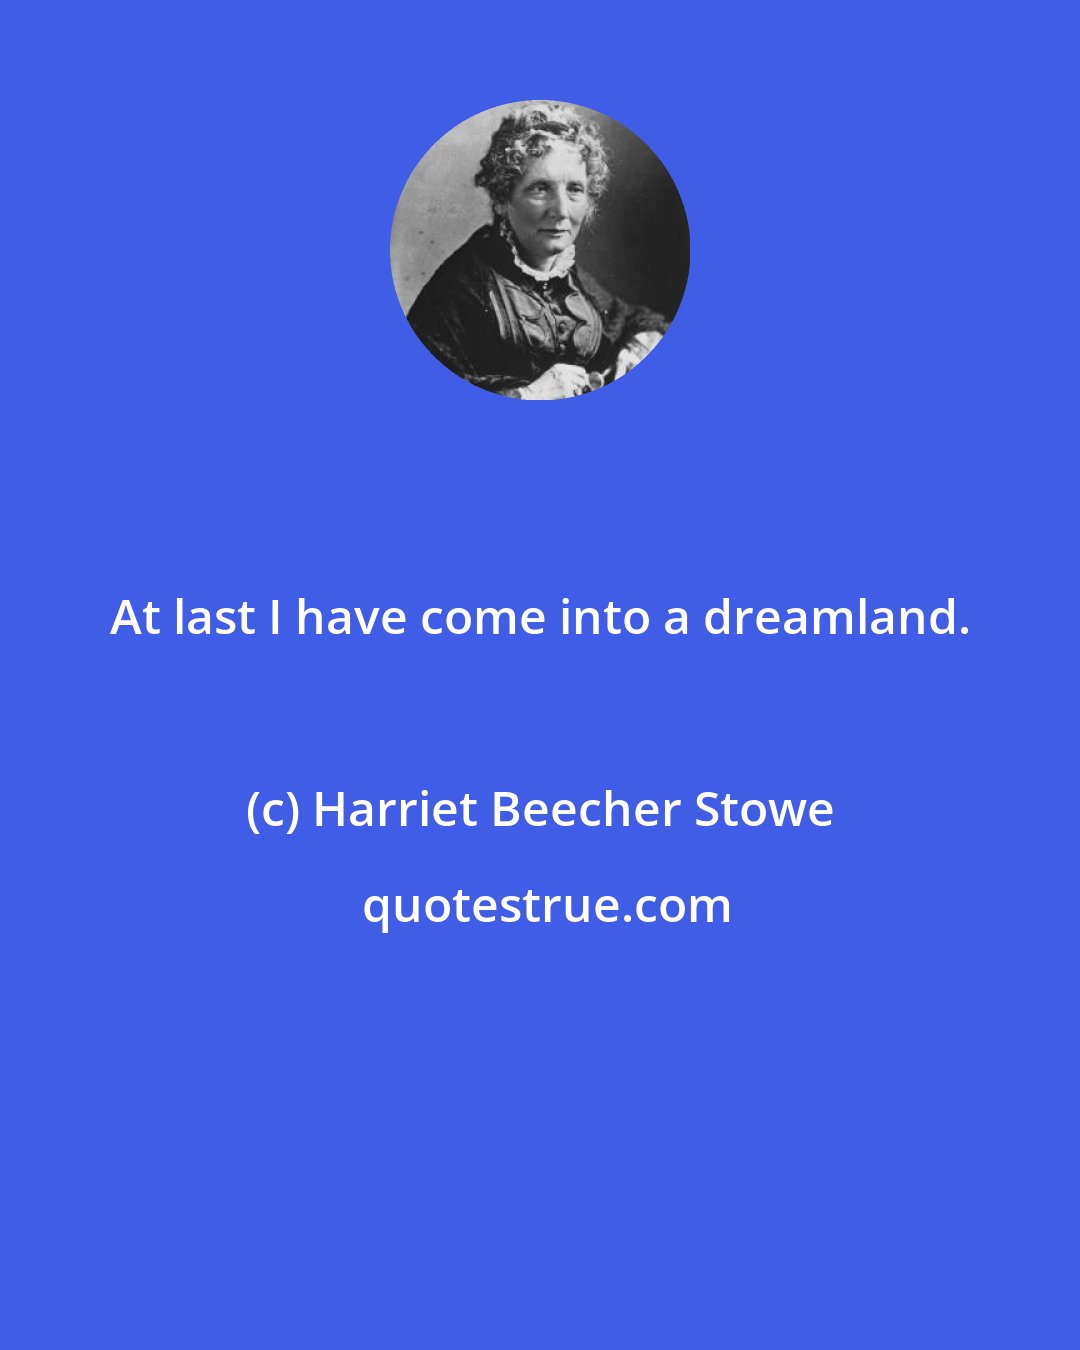 Harriet Beecher Stowe: At last I have come into a dreamland.